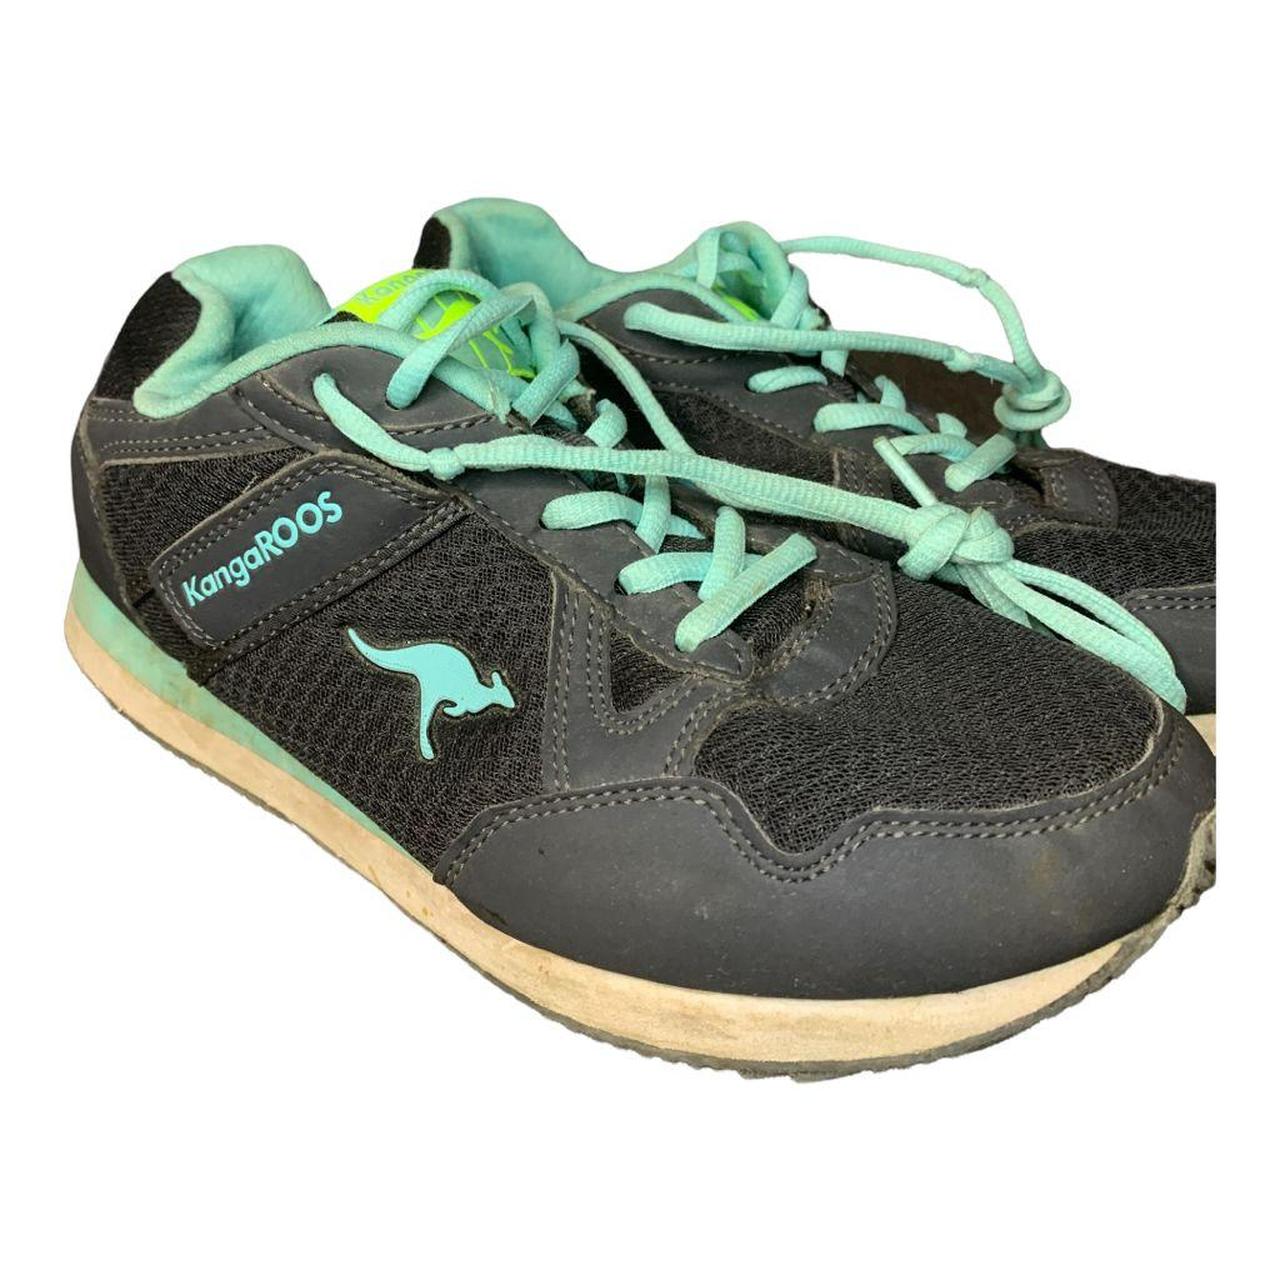 KangaROOS Women's Grey and Blue Trainers (2)